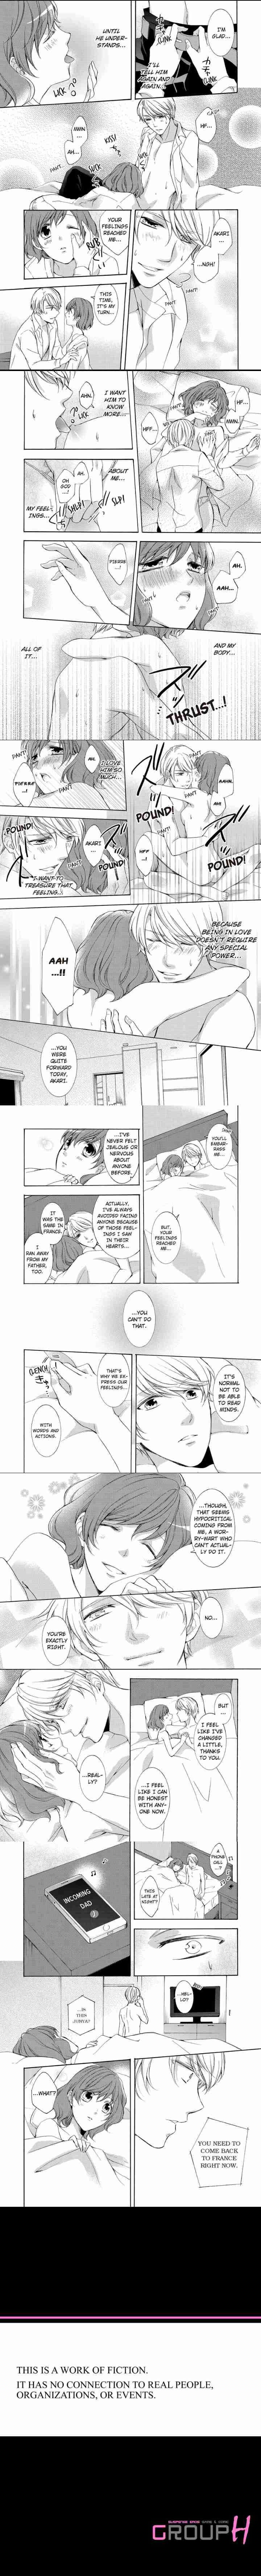 Pierre Takigawa Enjoys Making Me Melt / He can see right through me - Vol.1 Ch.5